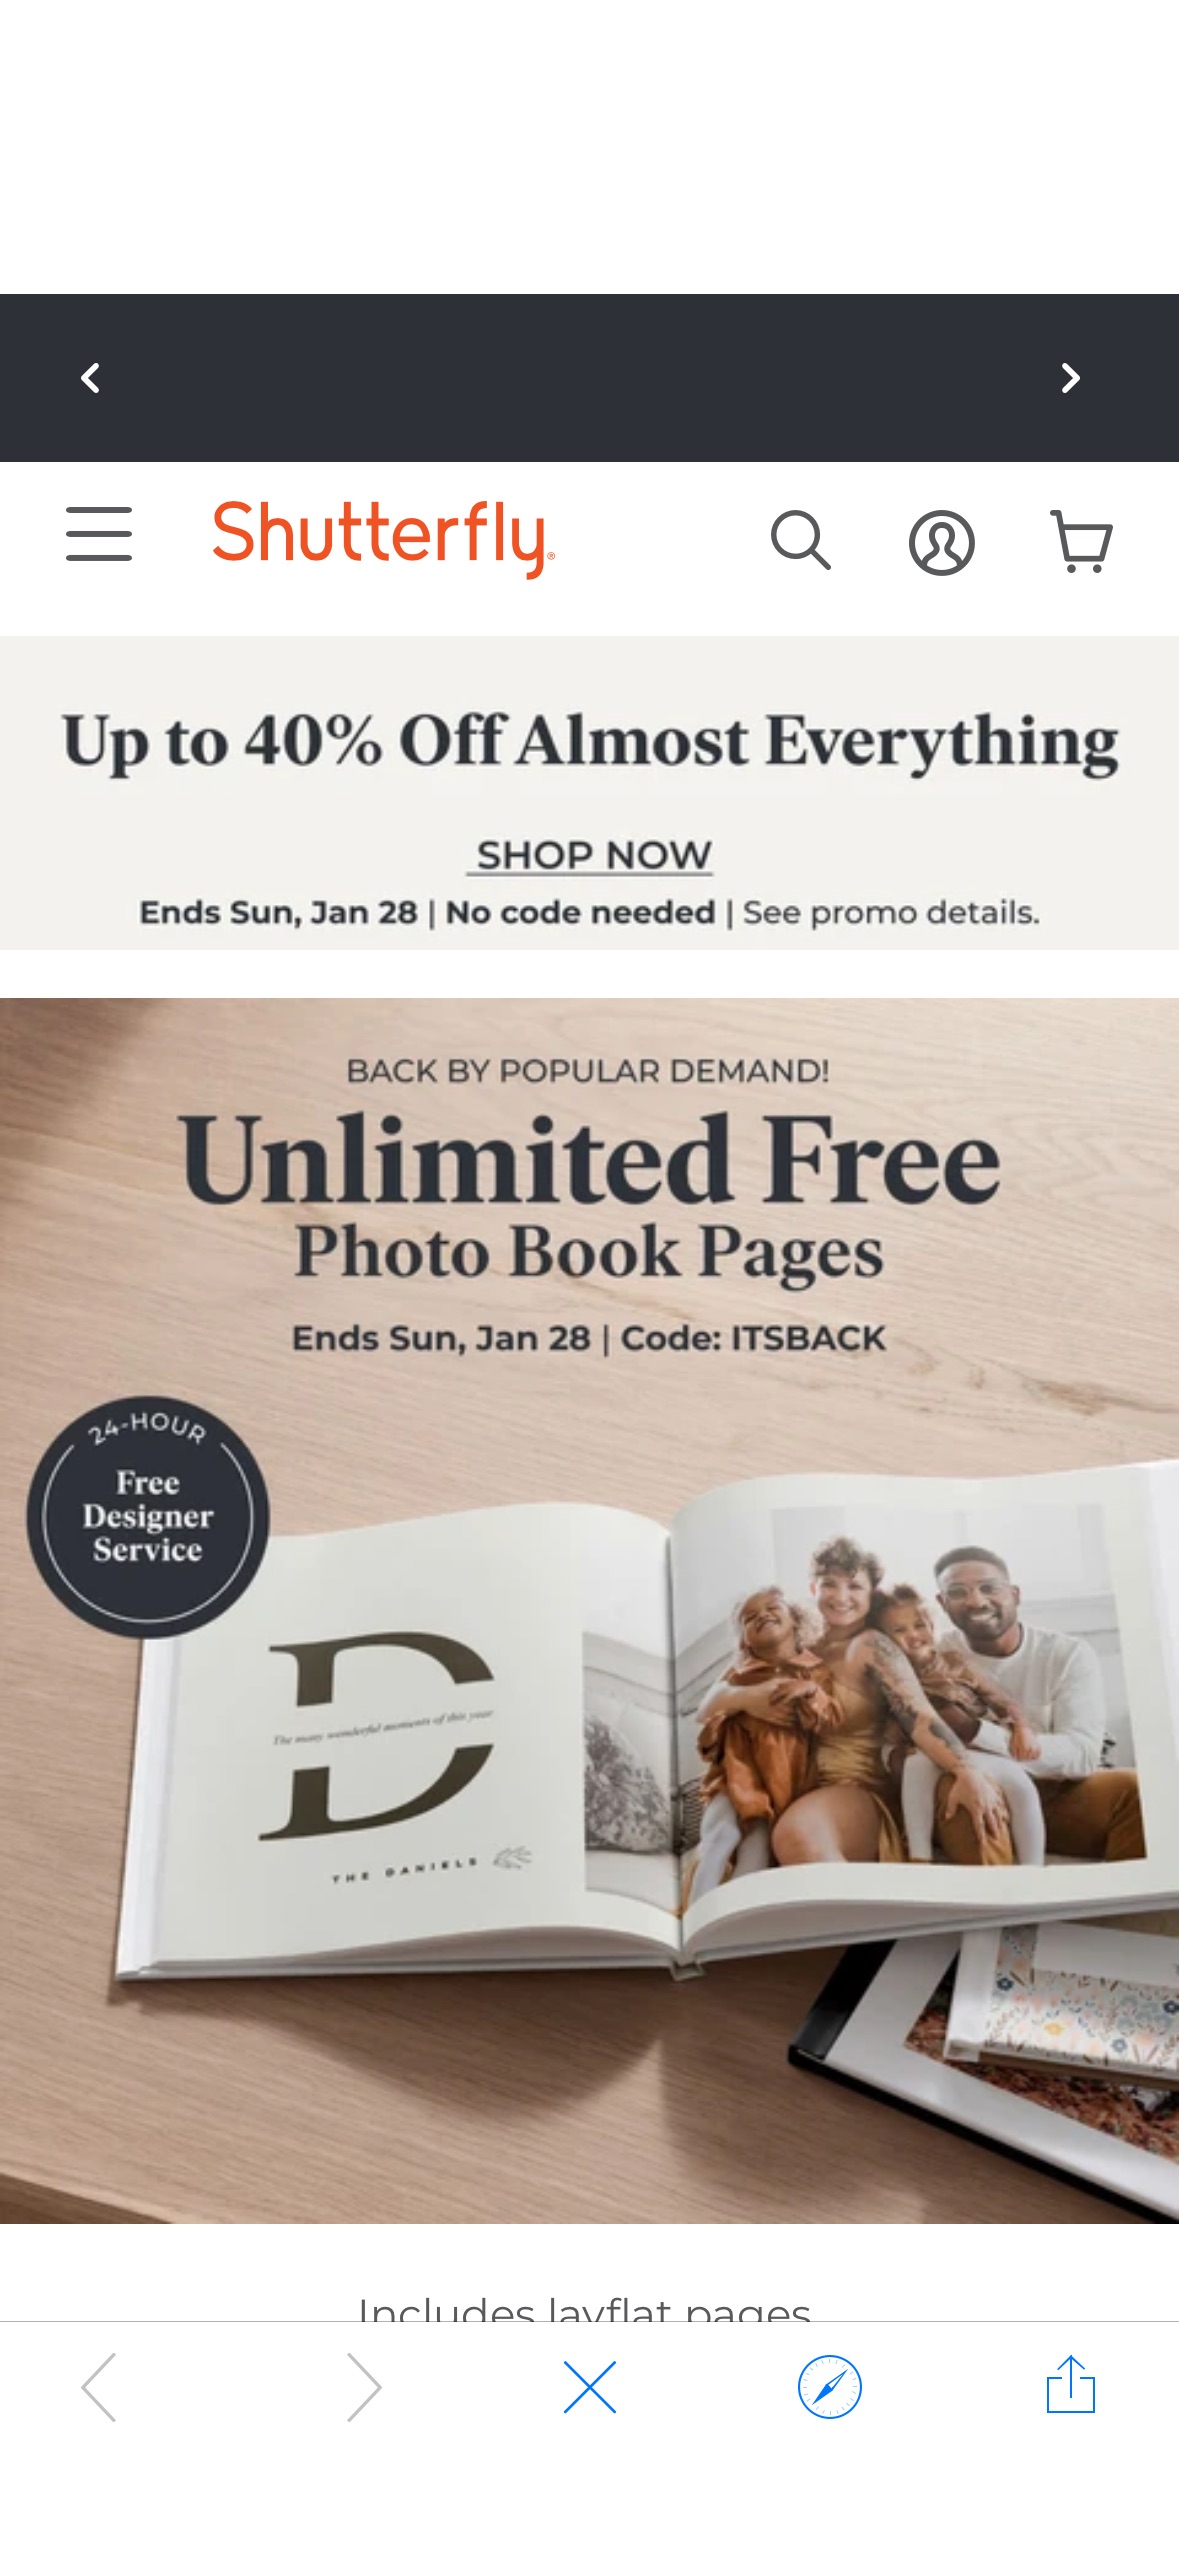 Shutterfly | Photo Books, Cards, Prints, Wall Art, Gifts, Wedding